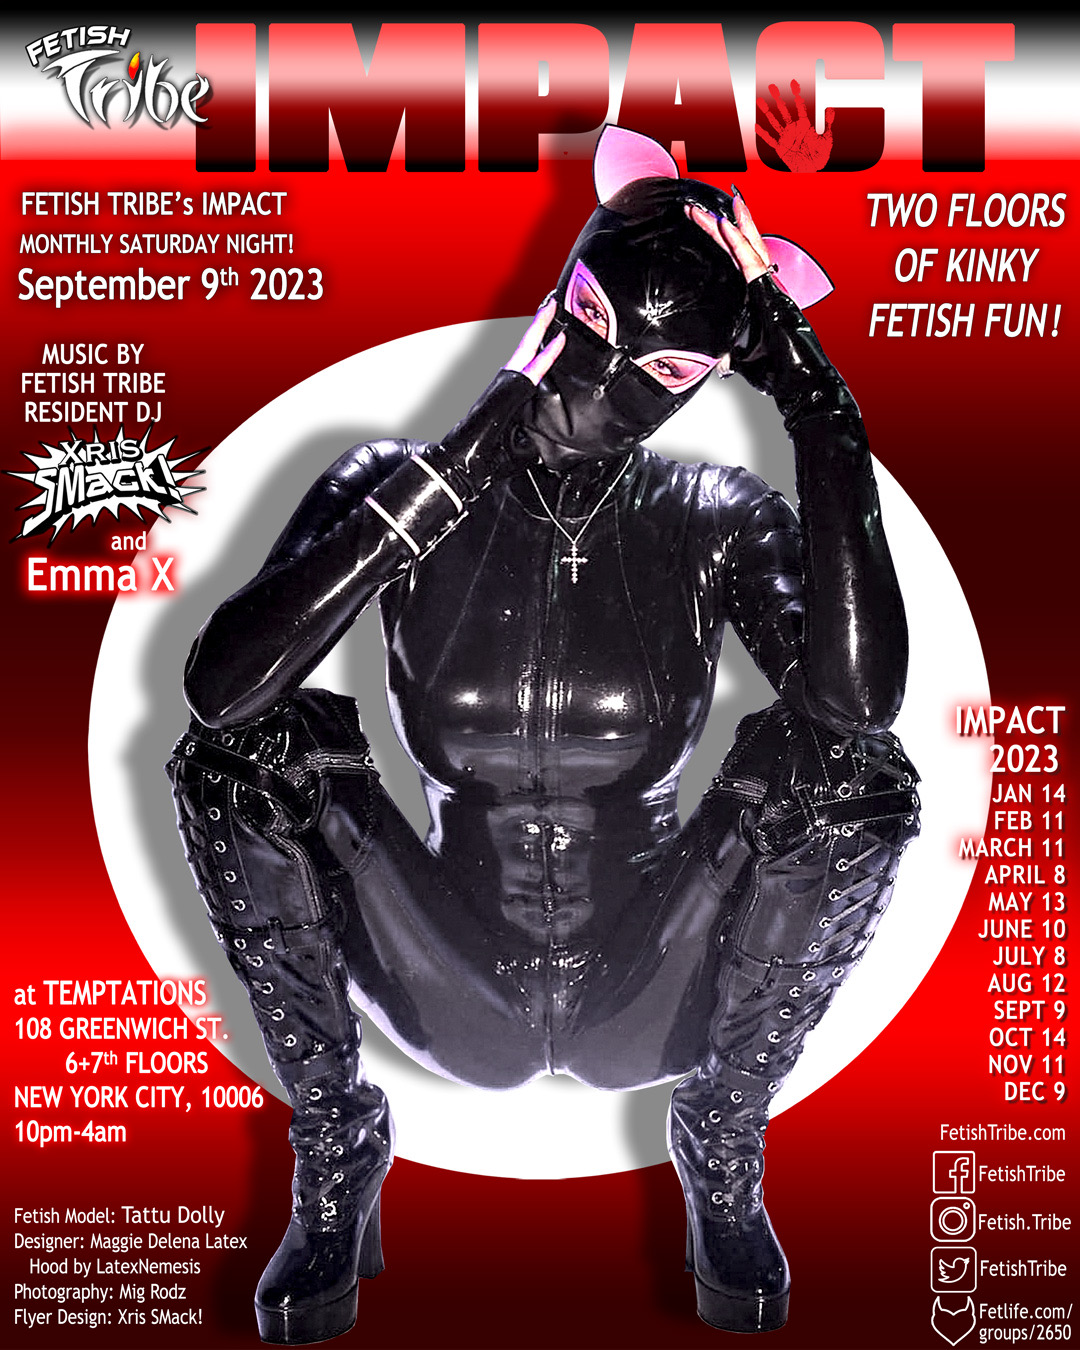 IMPACT! Sat. Sept 9th – Fetish Tribe’s monthly event in NYC!